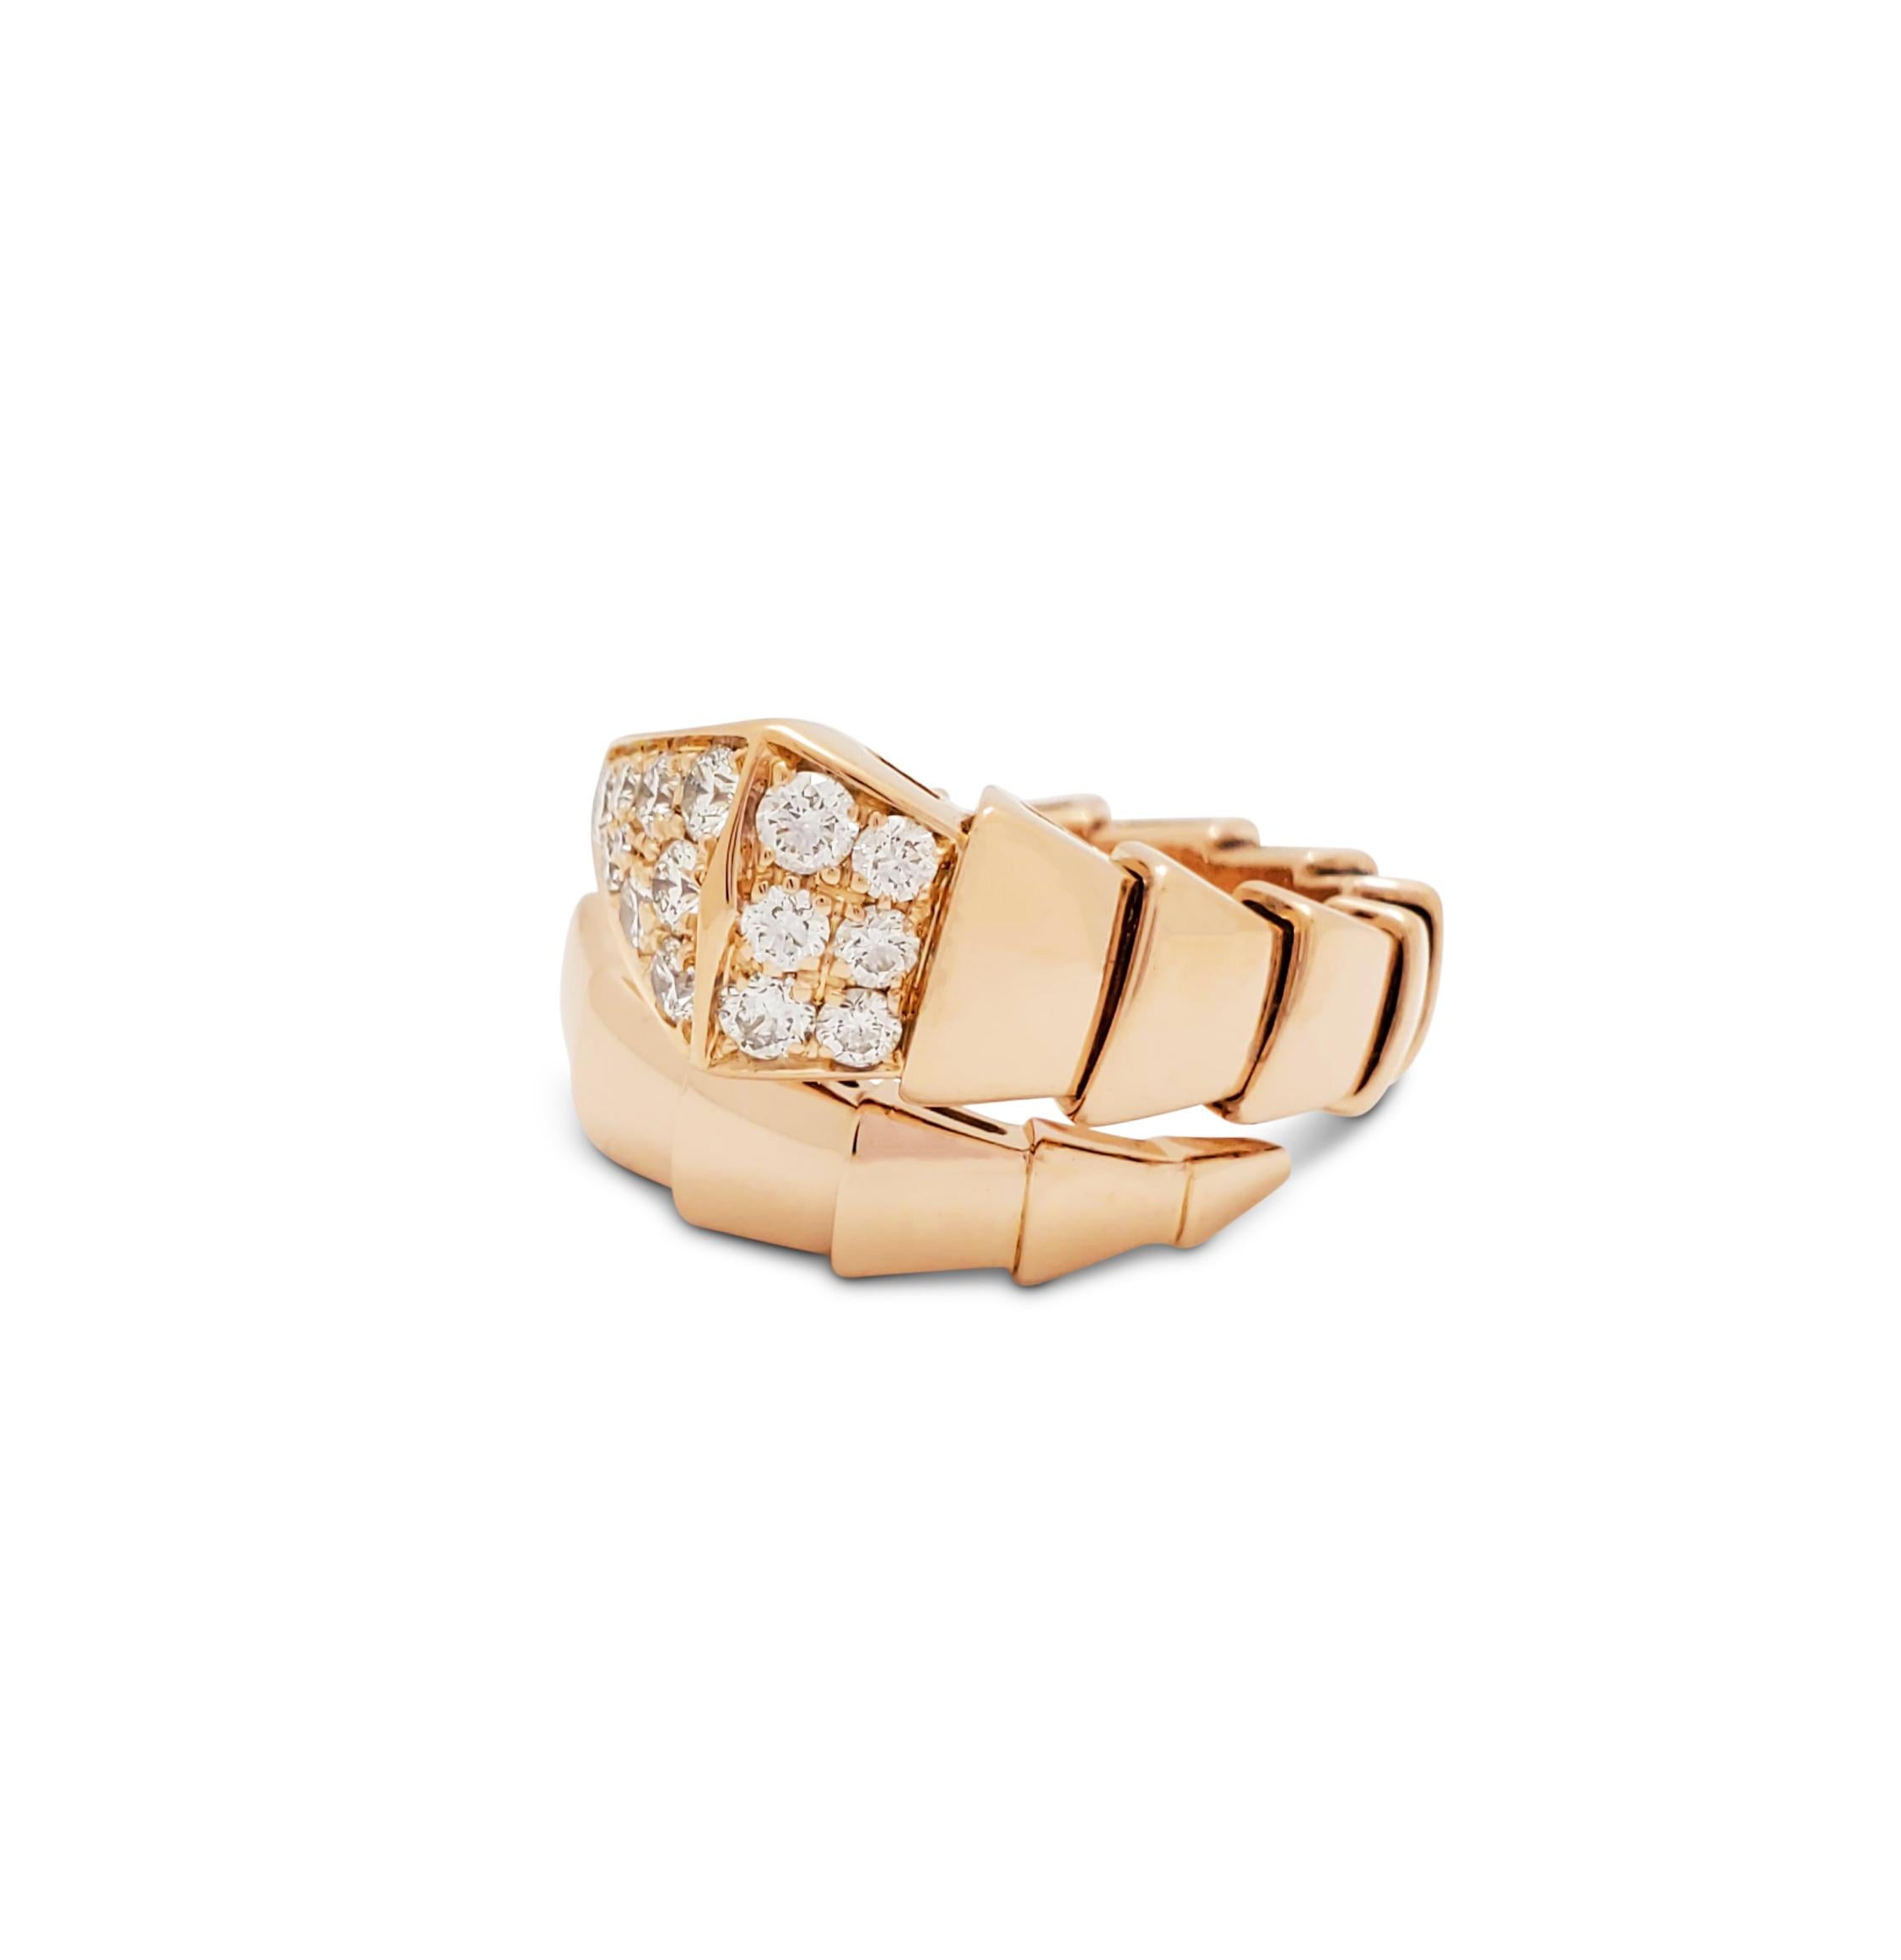 Authentic Bvlgari Serpenti Viper ring crafted in 18 karat rose gold. The serpentine design coils around the finger and features pavé set diamonds of an estimated 0.53 total carats on the head. Size M, will fit US finger sizes 5 3/4- 6 1/2 (EU